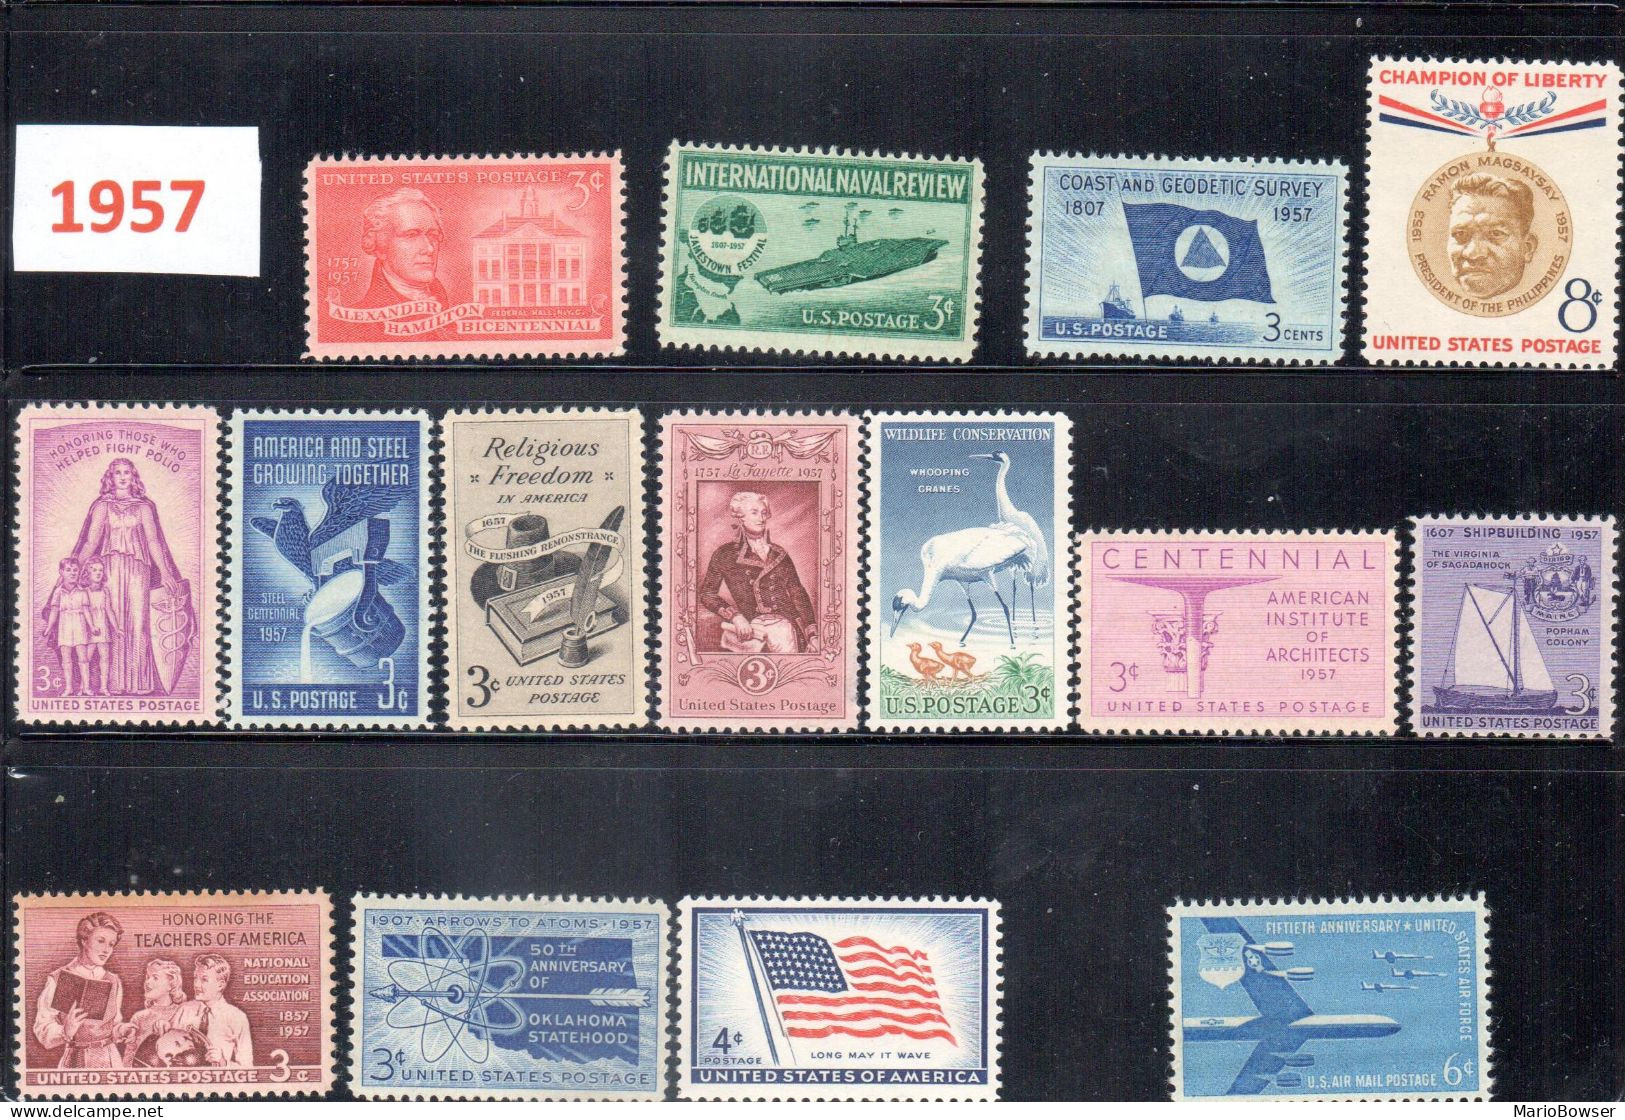 USA 1957 Full Year Commemorative MNH Stamps Set 15 Stamps With Airmail - Volledige Jaargang